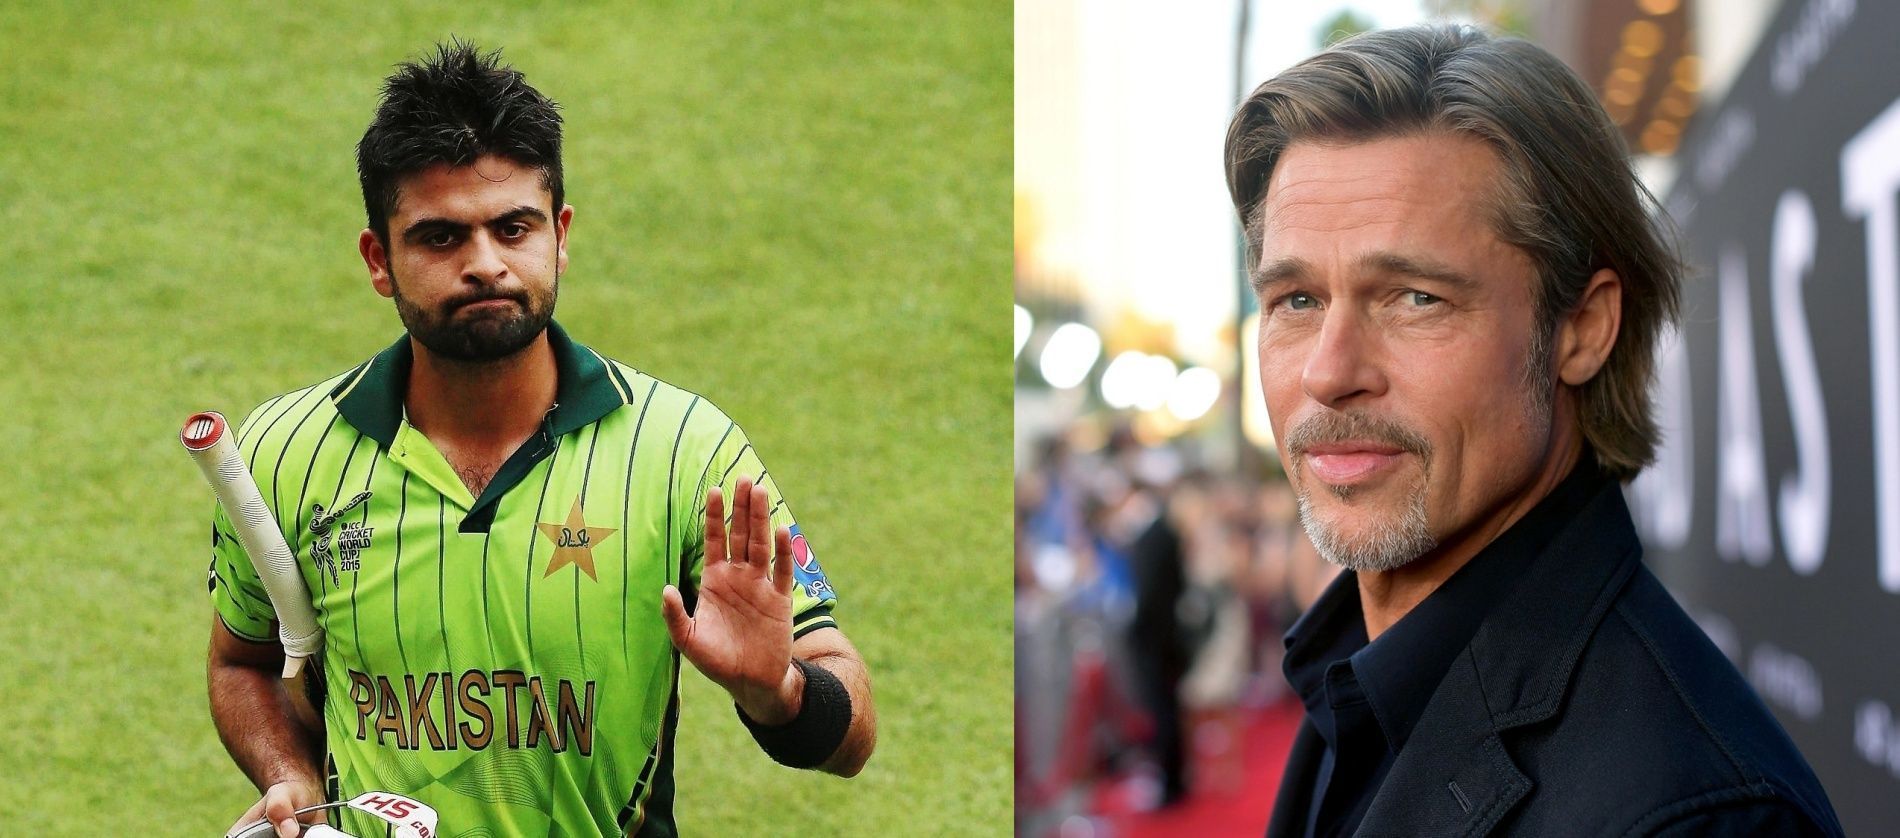 Ahmed Shehzad (left) and Brad Pitt. Pics: Getty Images